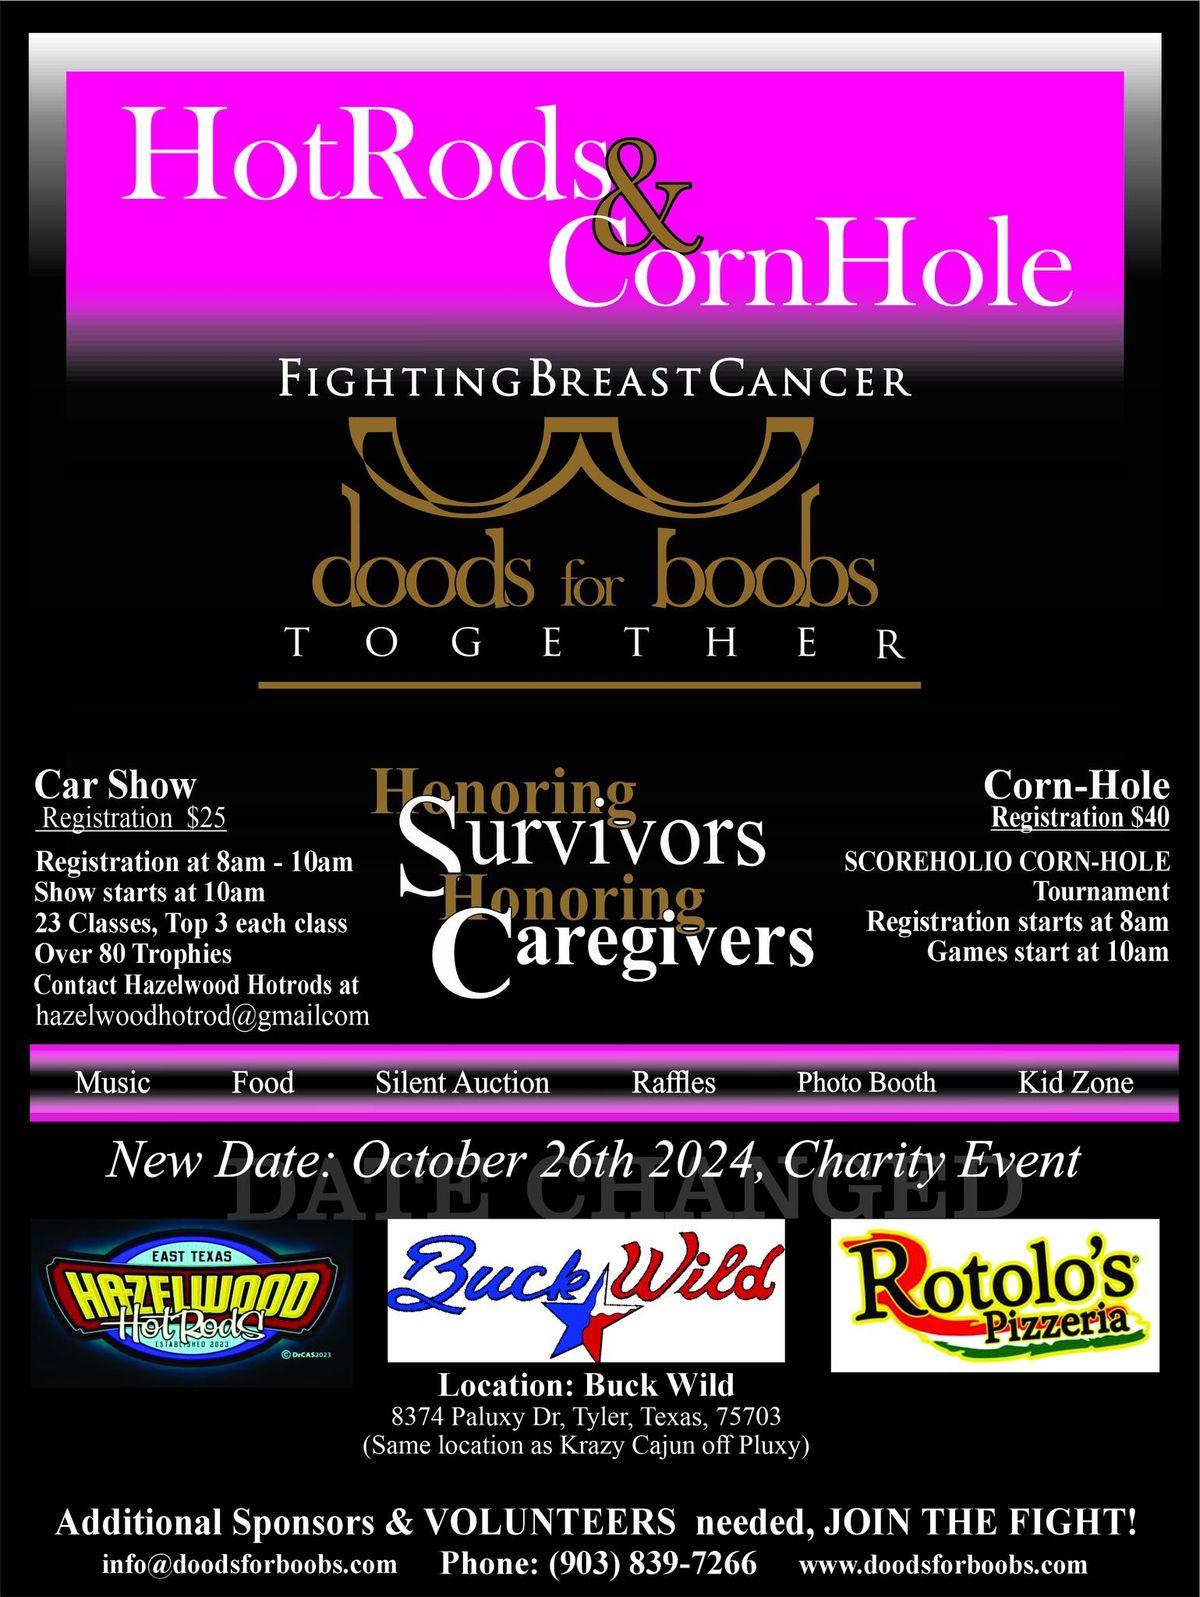 HotRods & Corn Hole Fund Raiser for "Fighting Breast Cancer"